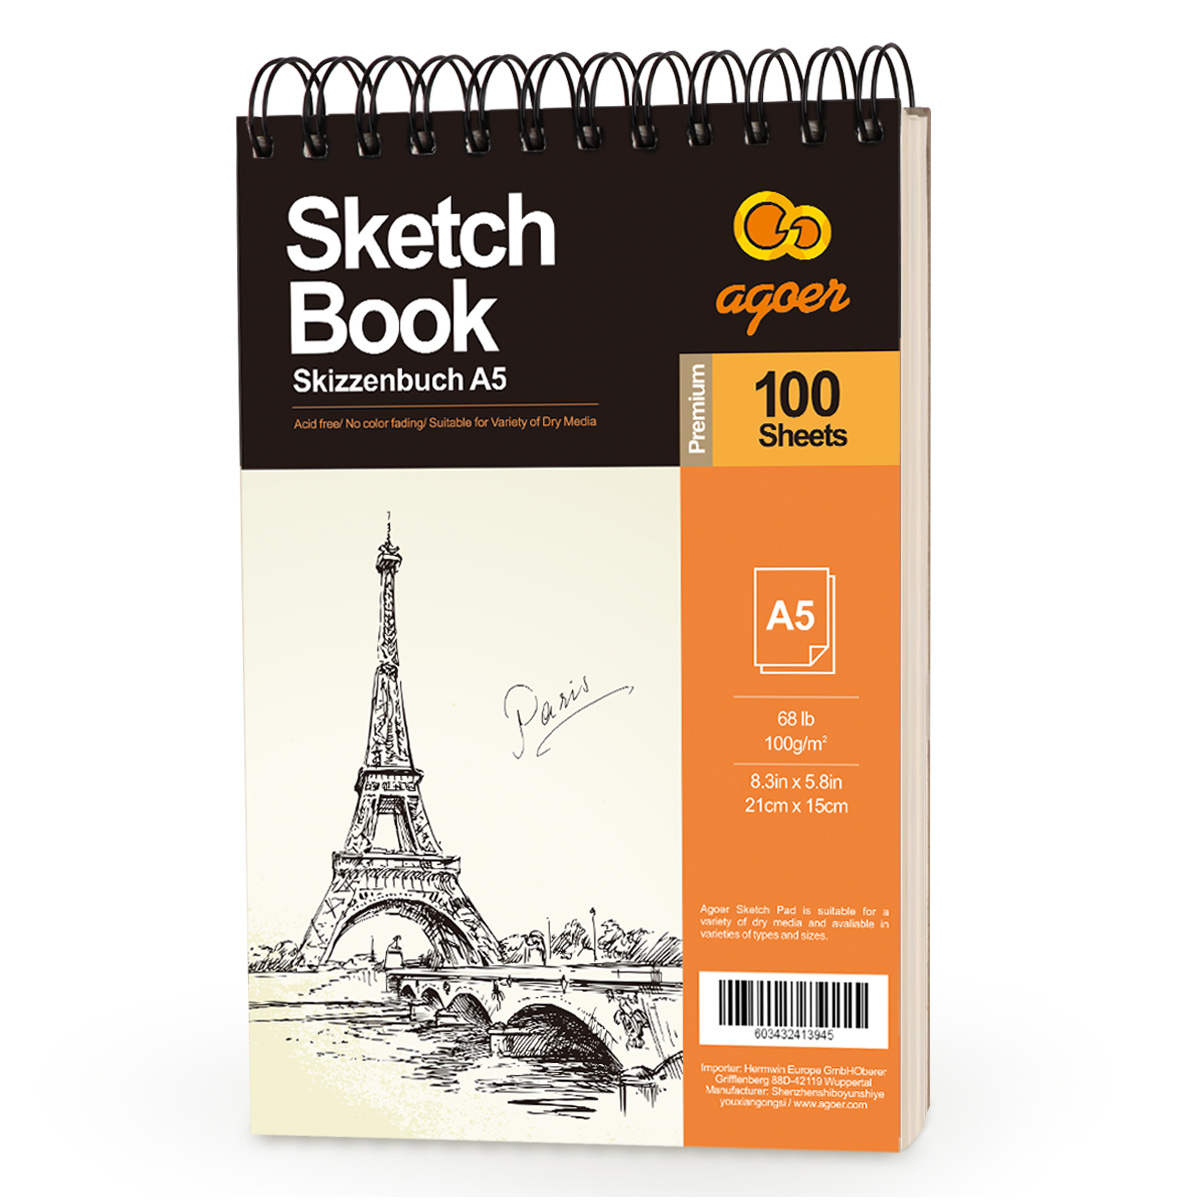 Sketchbook, A4/a5/a6, 1 Pack Of 30 Pages, Sketch Paper For Art Students,  Top Spiral